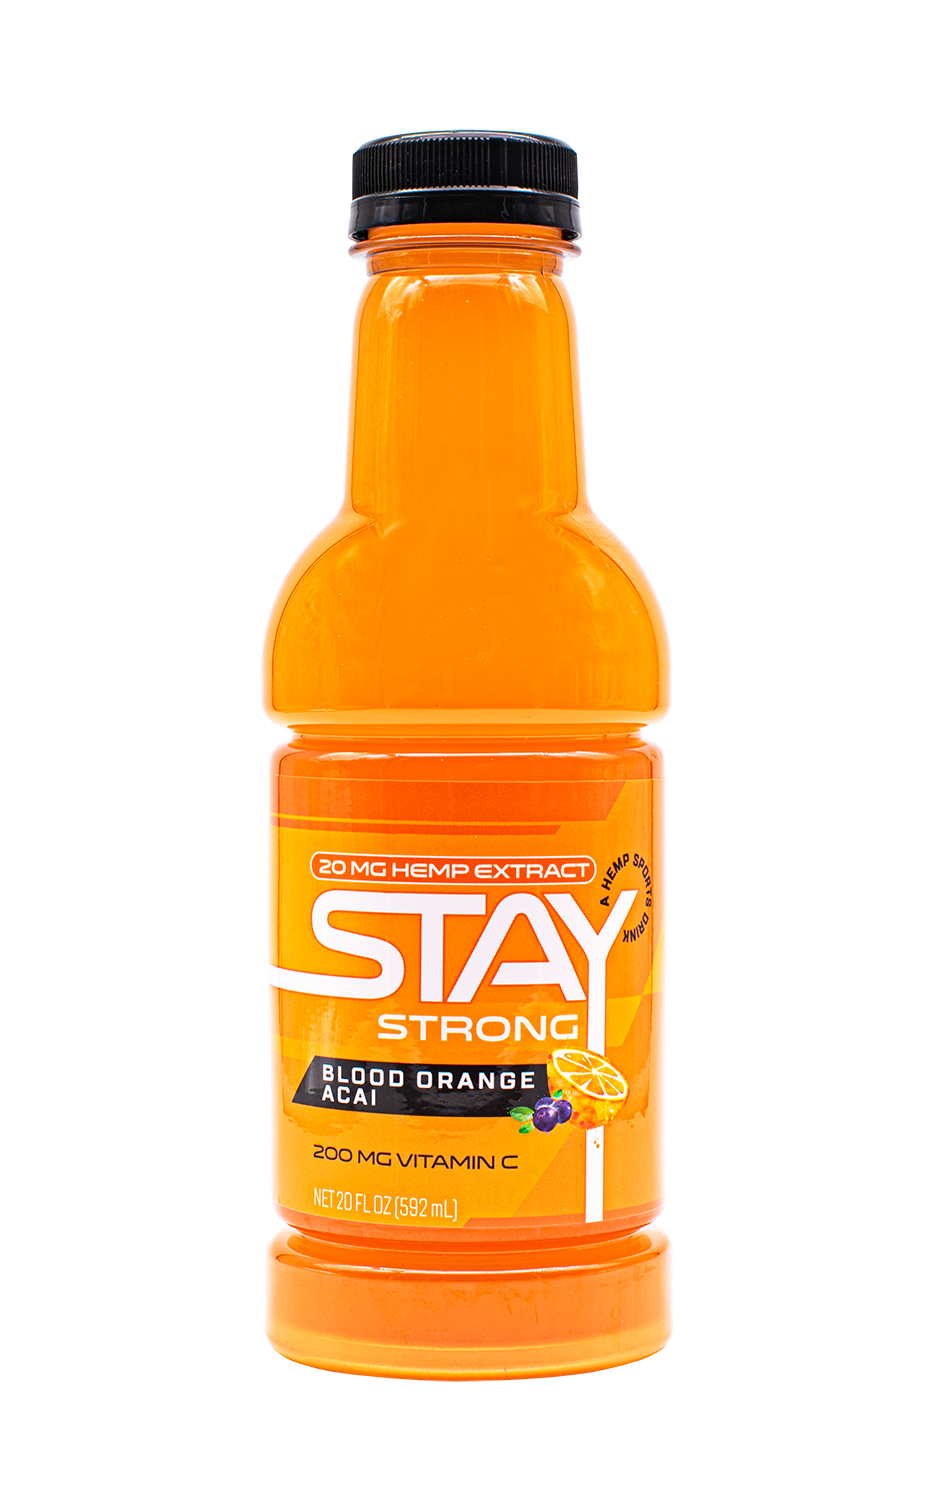 STAY Strong – 4-pack of Blood Orange Acai